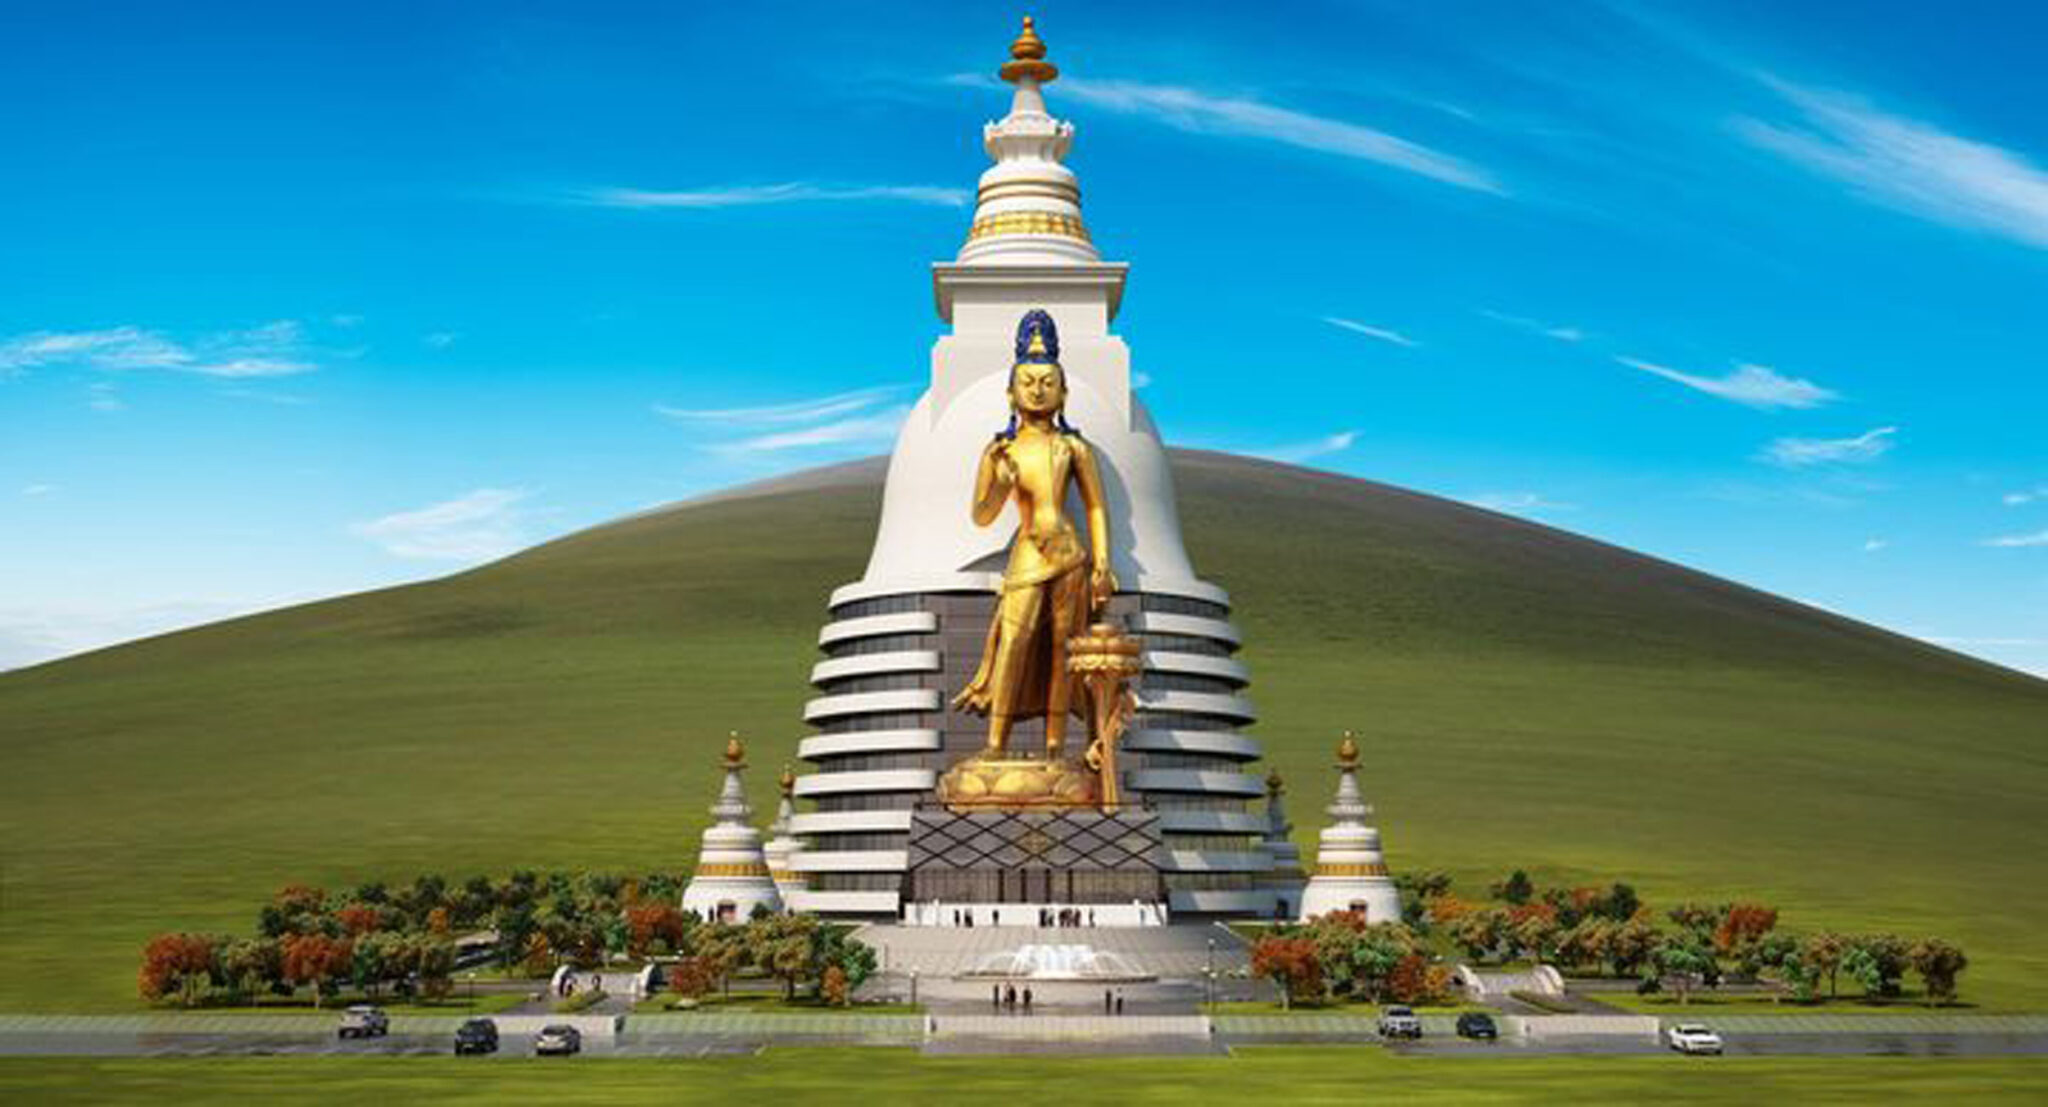 Computer-generated image depicting design for monumental white stupa and colossal golden Buddha amid trees